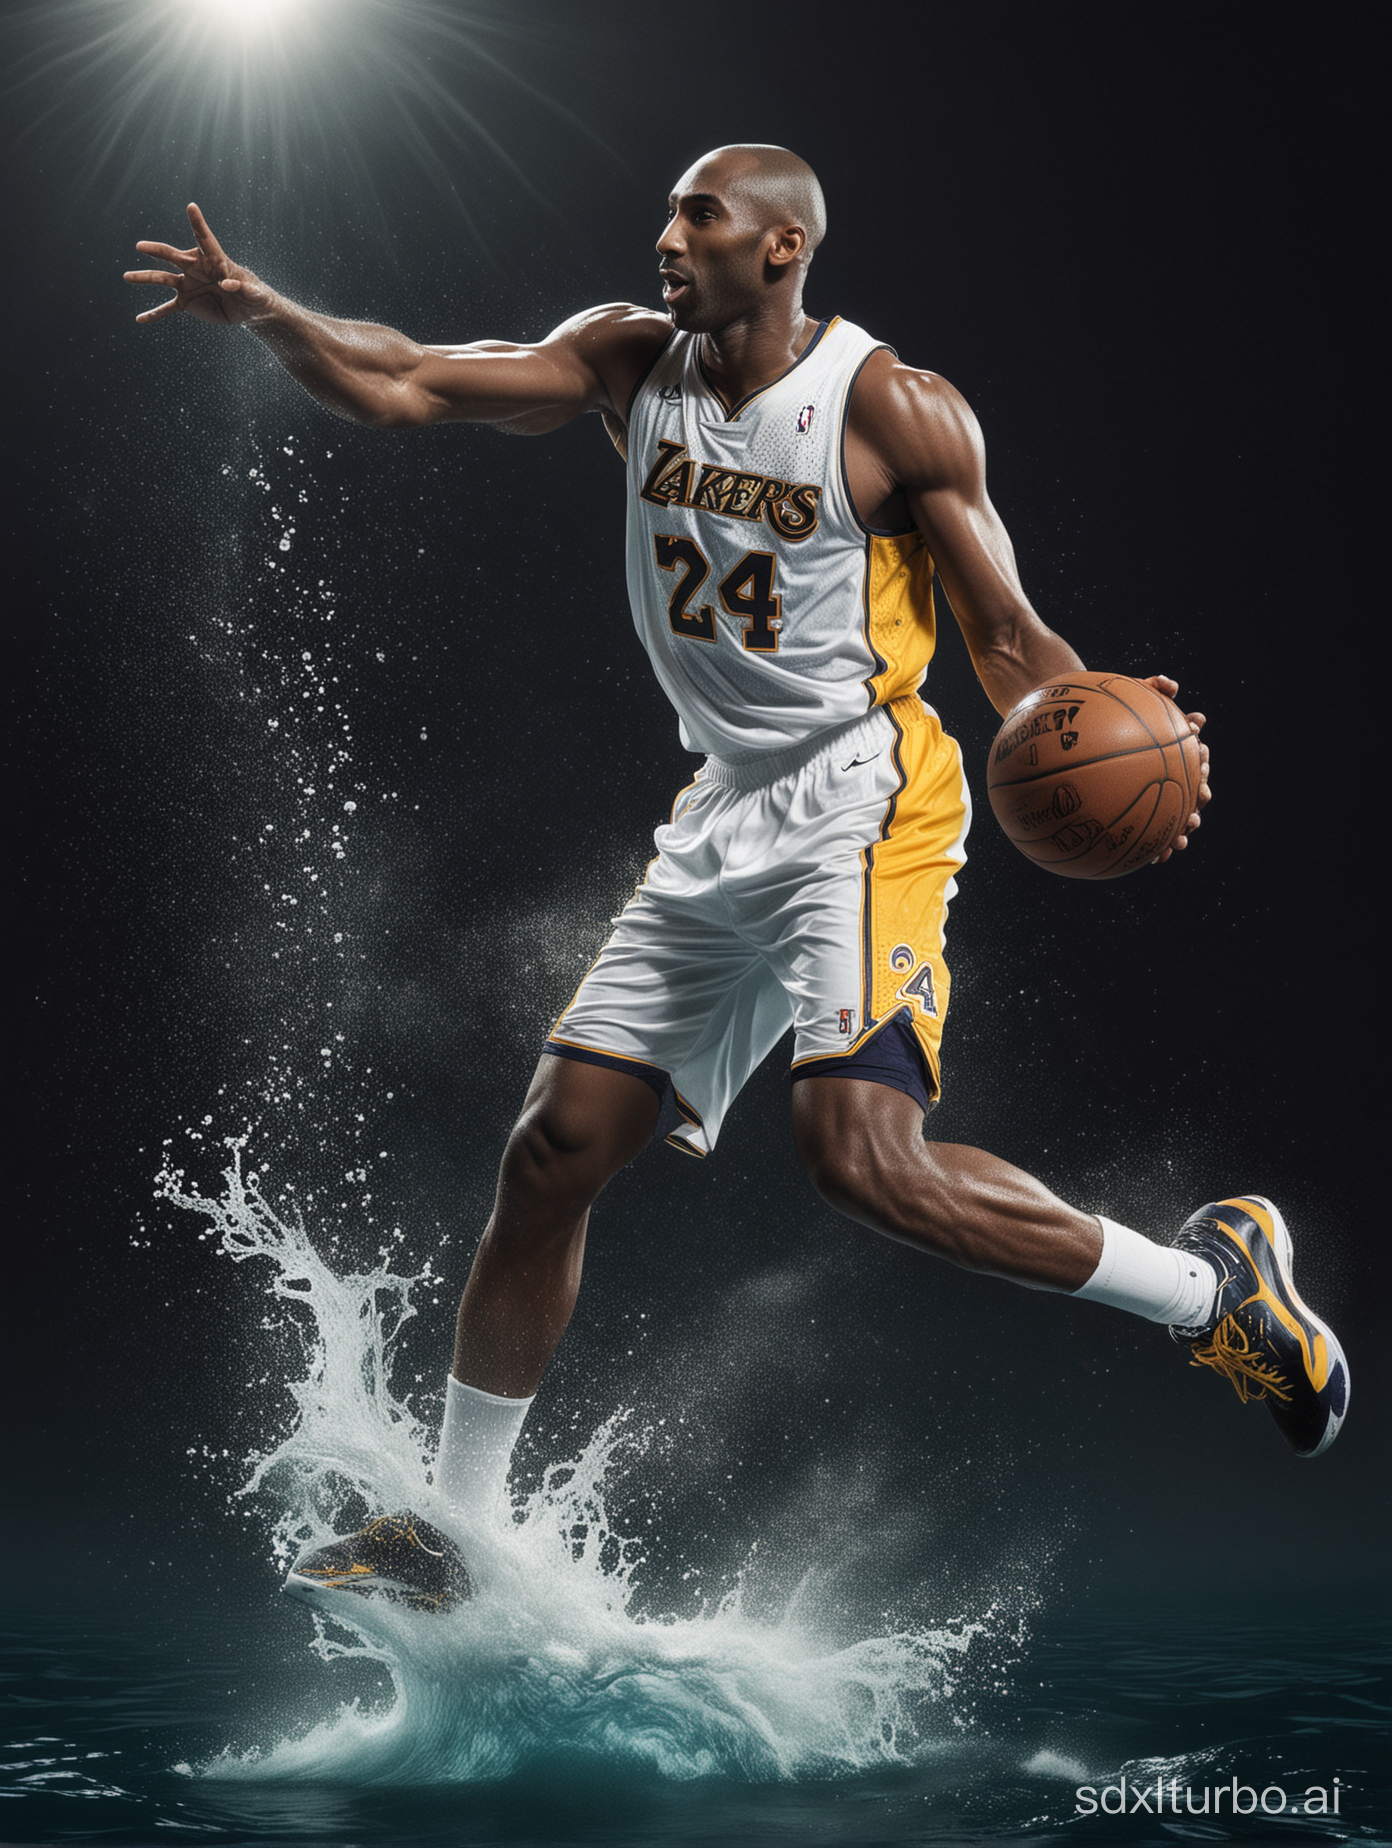 A Kobe Bryant wearing the number 24 jersey in the Deep Sea takes a backward jump shot